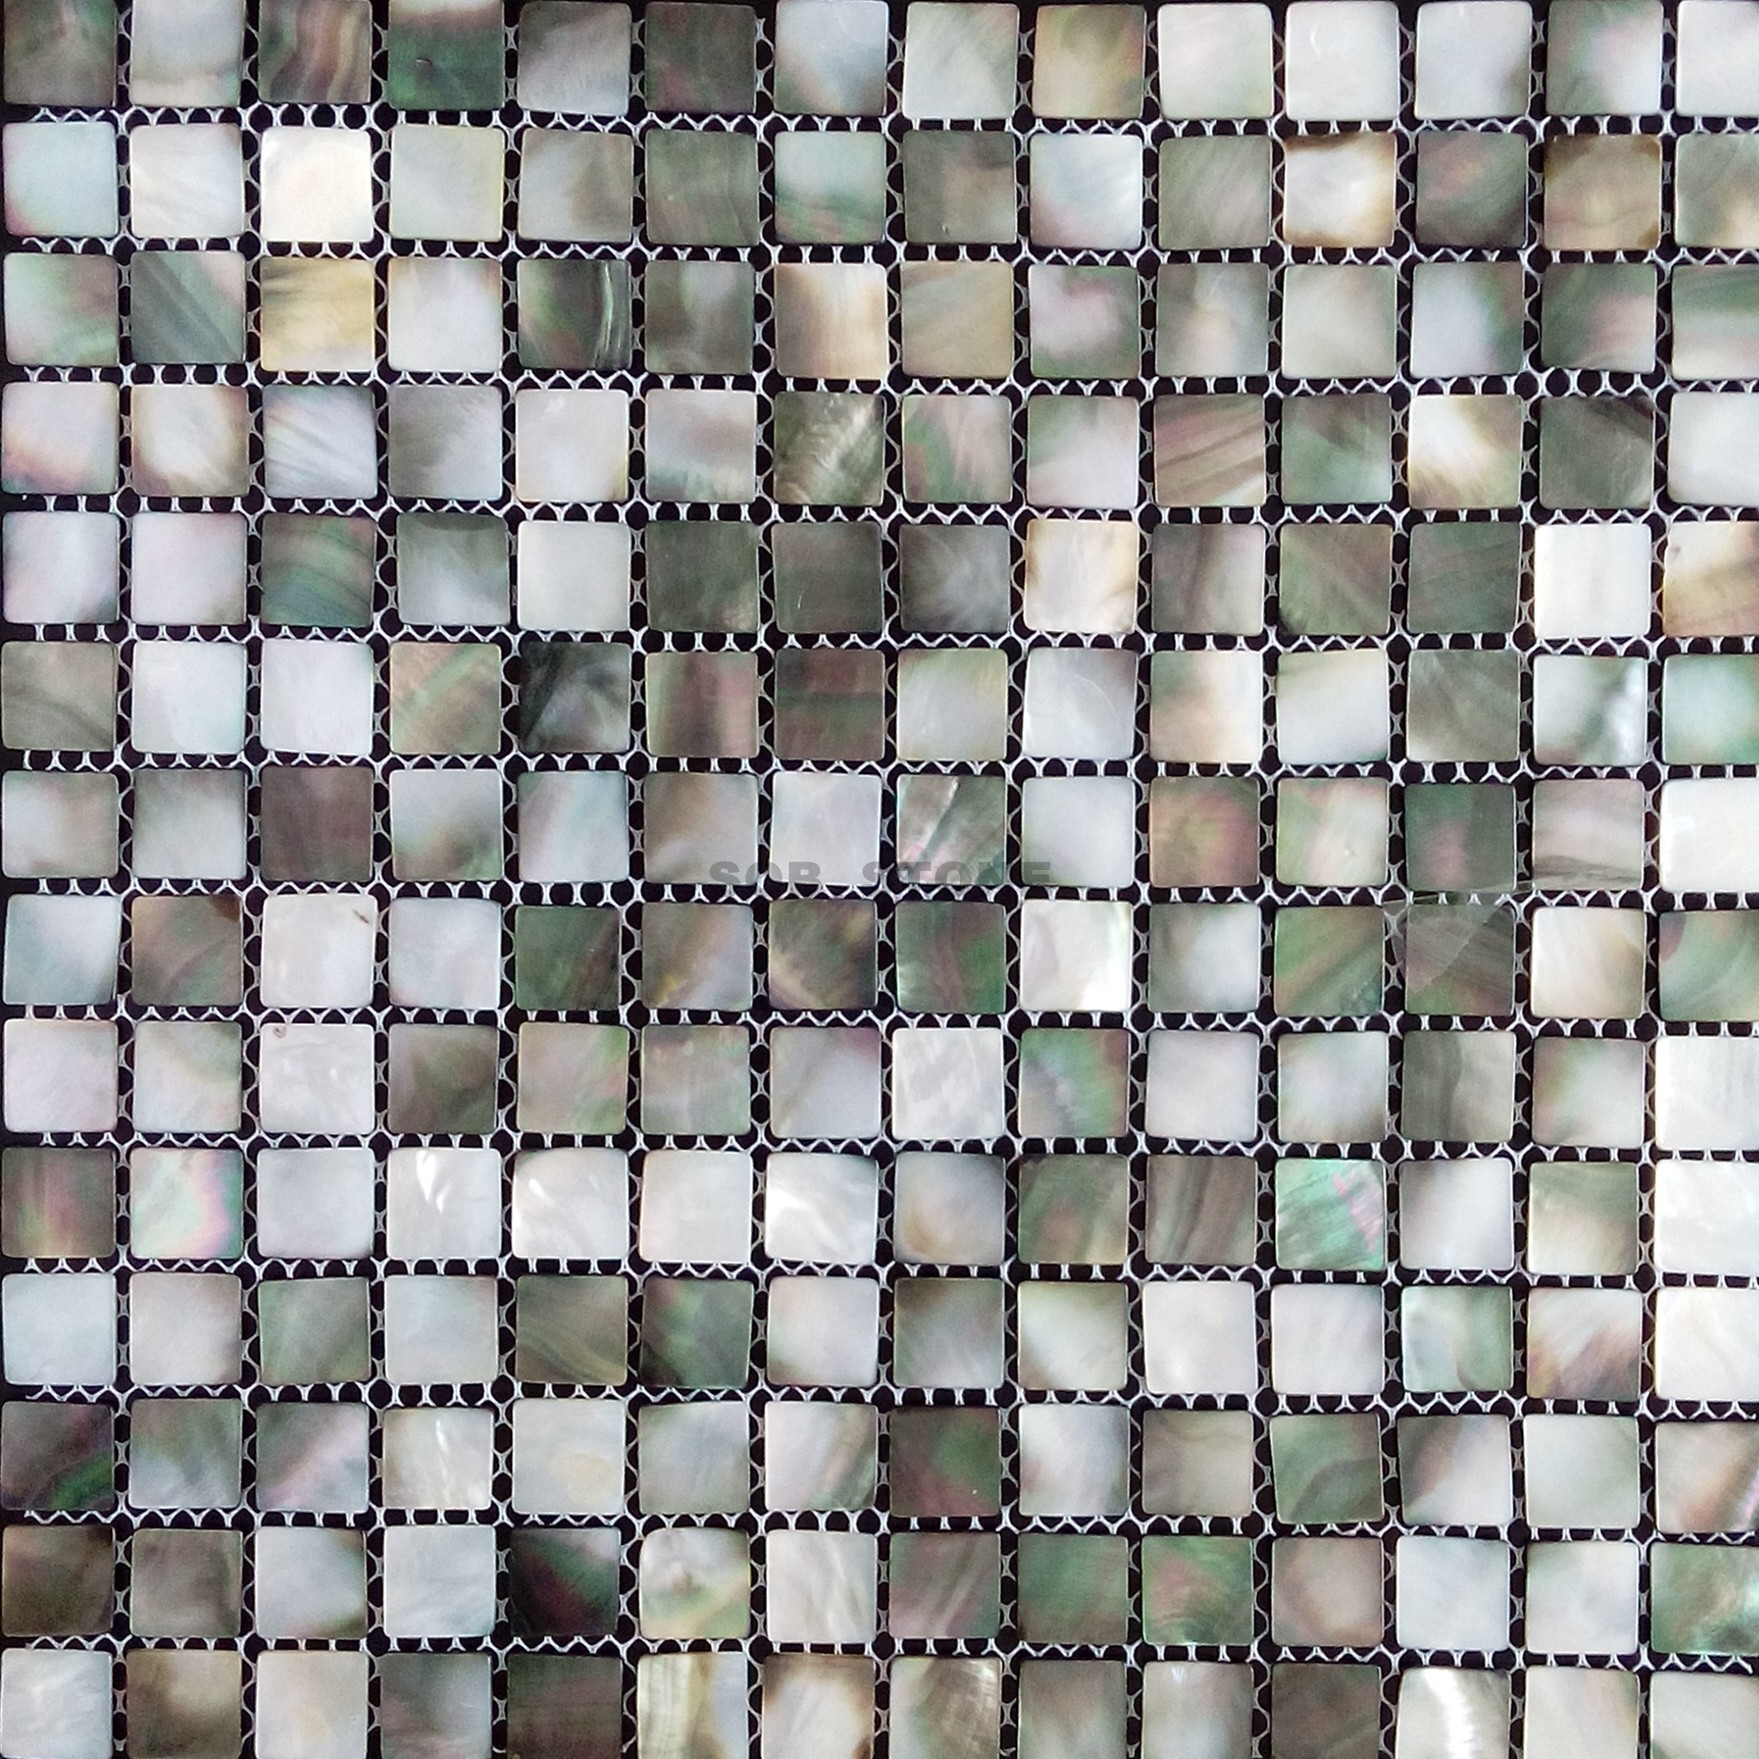 Black Butterfly Mother of Pearl Mosaic Tiles Seashell 